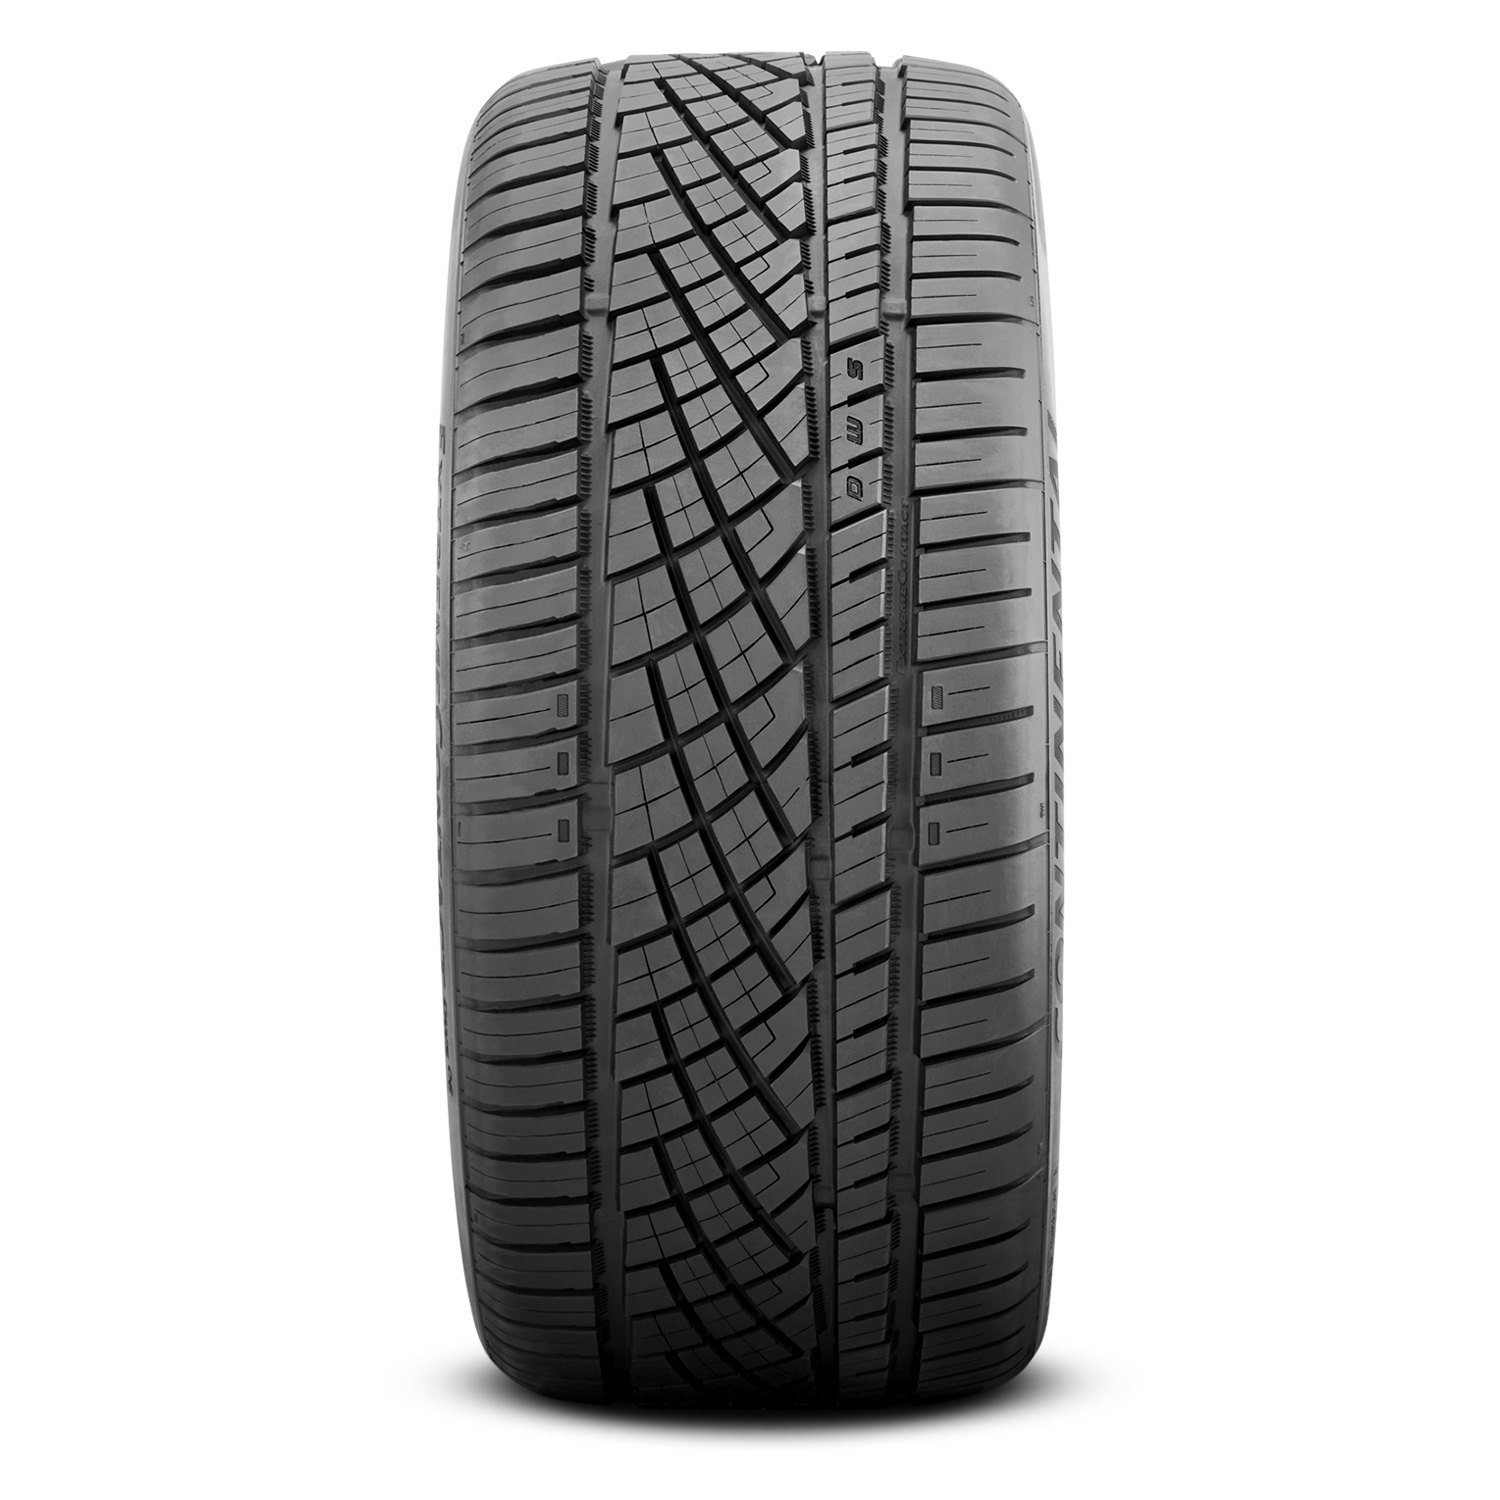 continental-extremecontact-dws06-tires